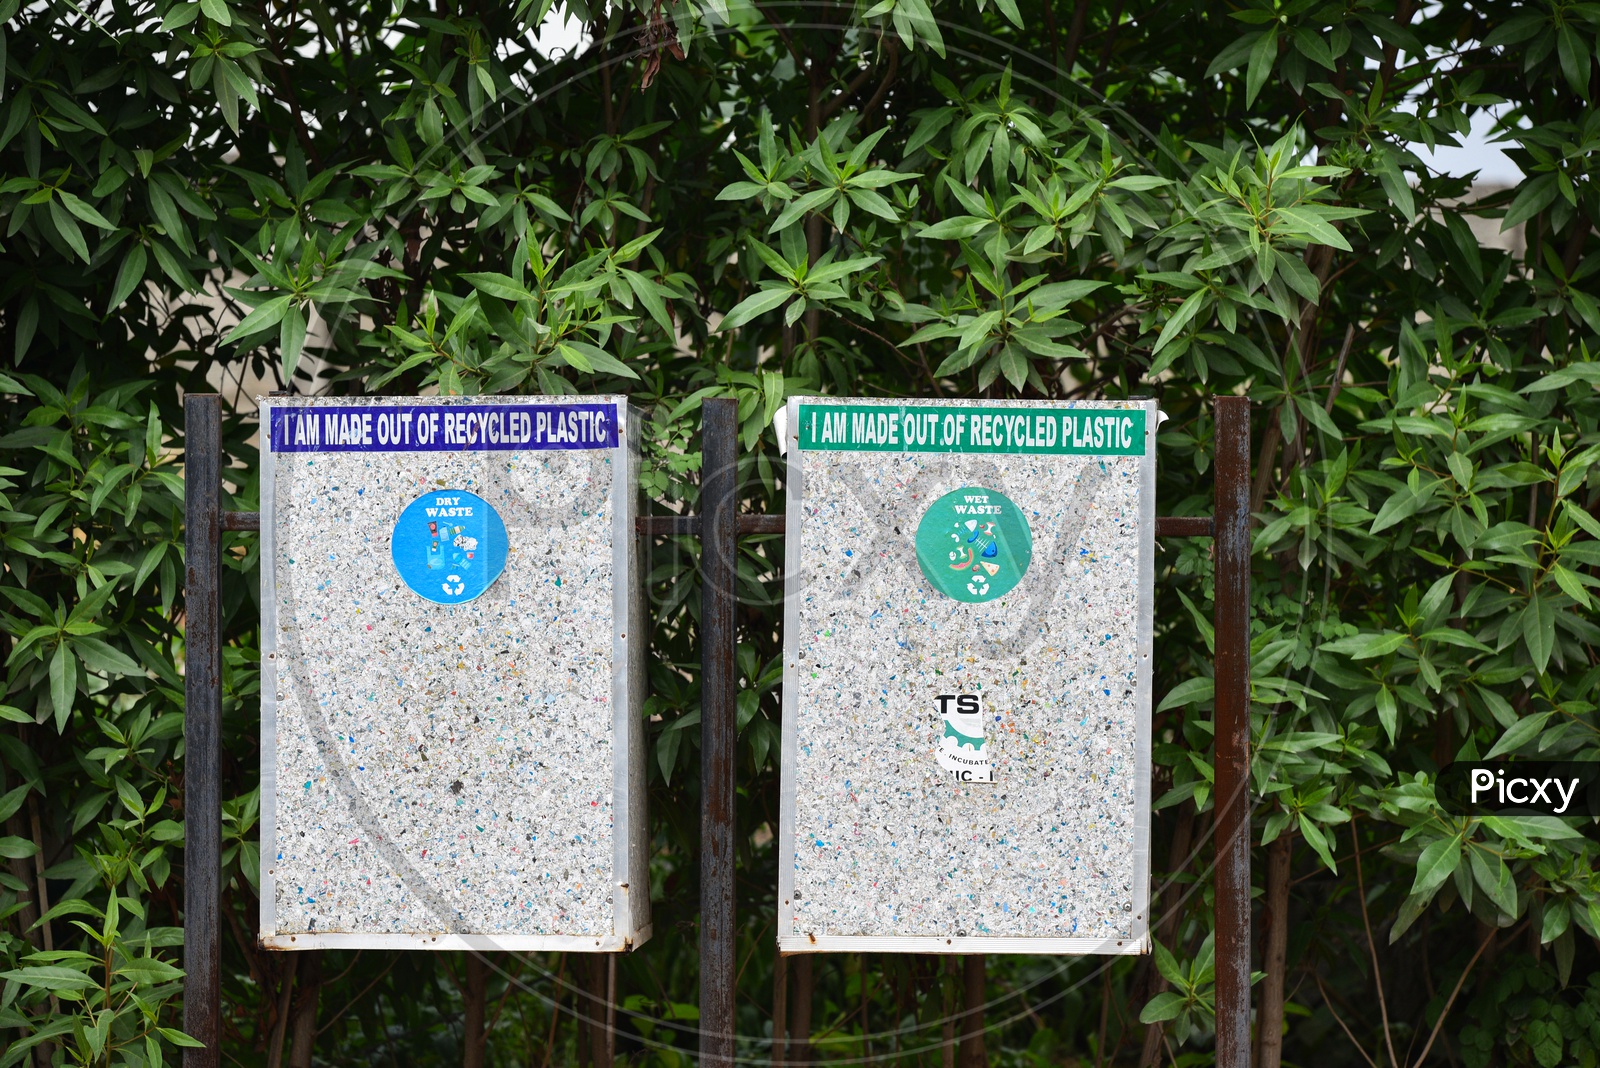 Dustbin Or trash Bin Made Of Recycled Plastics by GHMC On Hyderabad City Roads